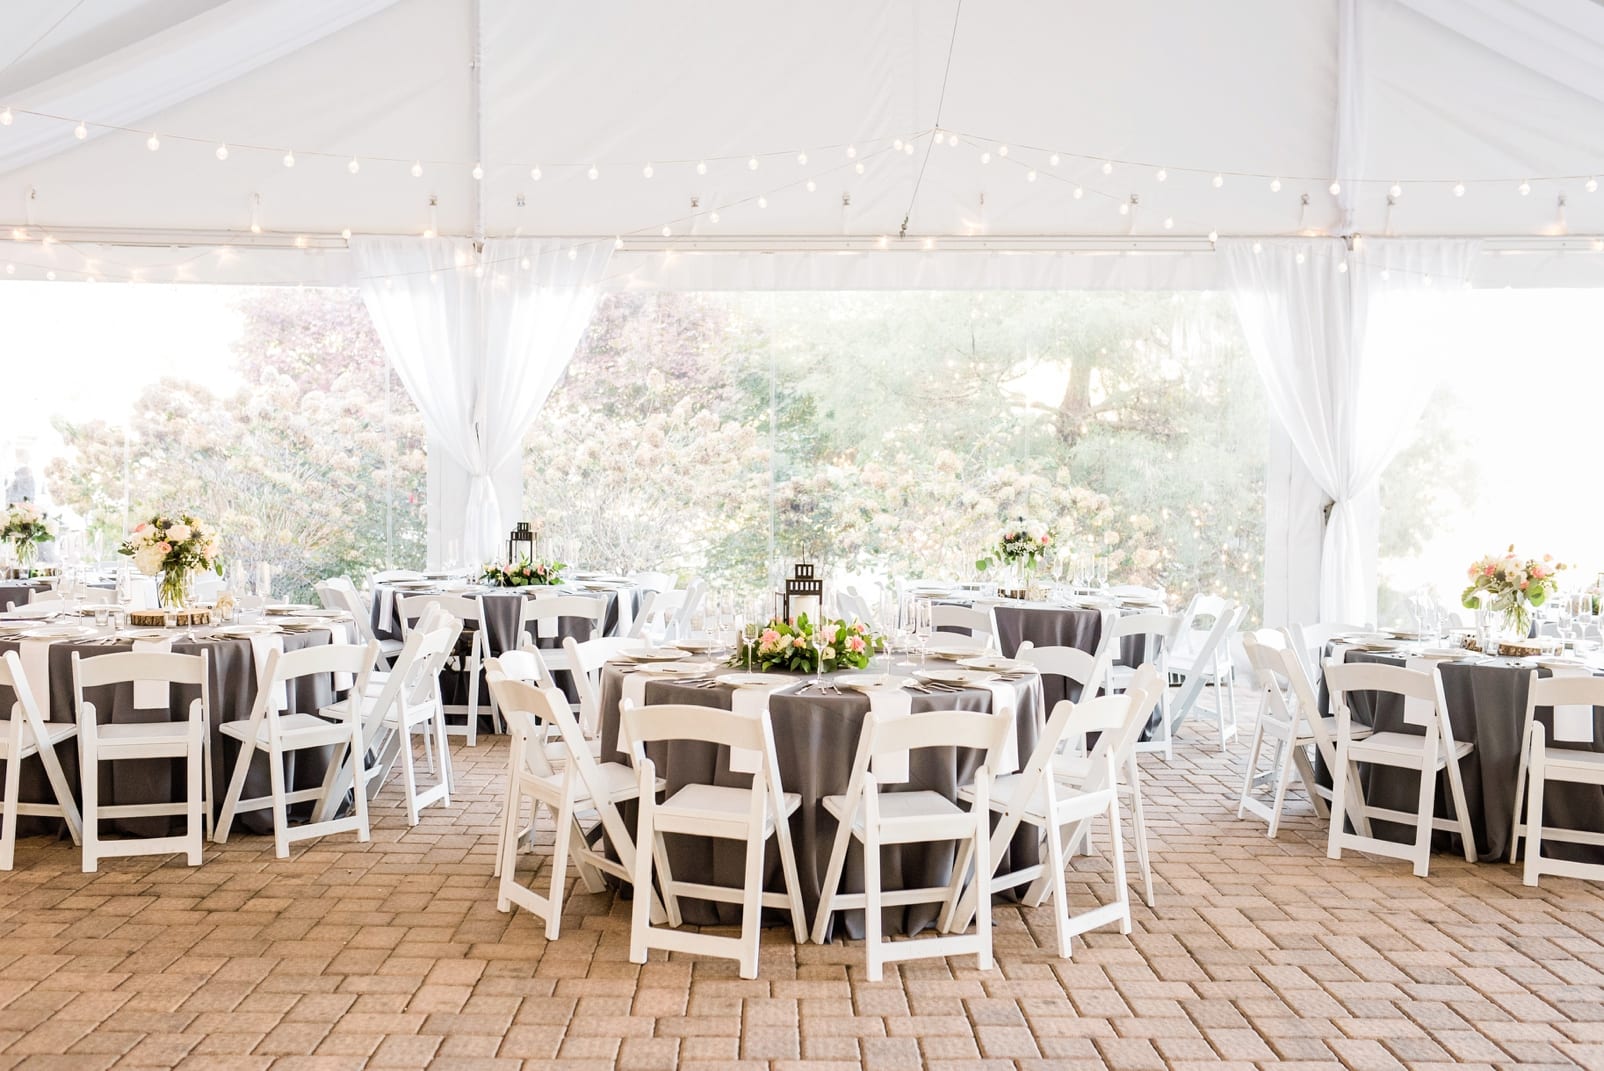 Oaks at Salem wedding reception with round table and dusty blue table cloths photo